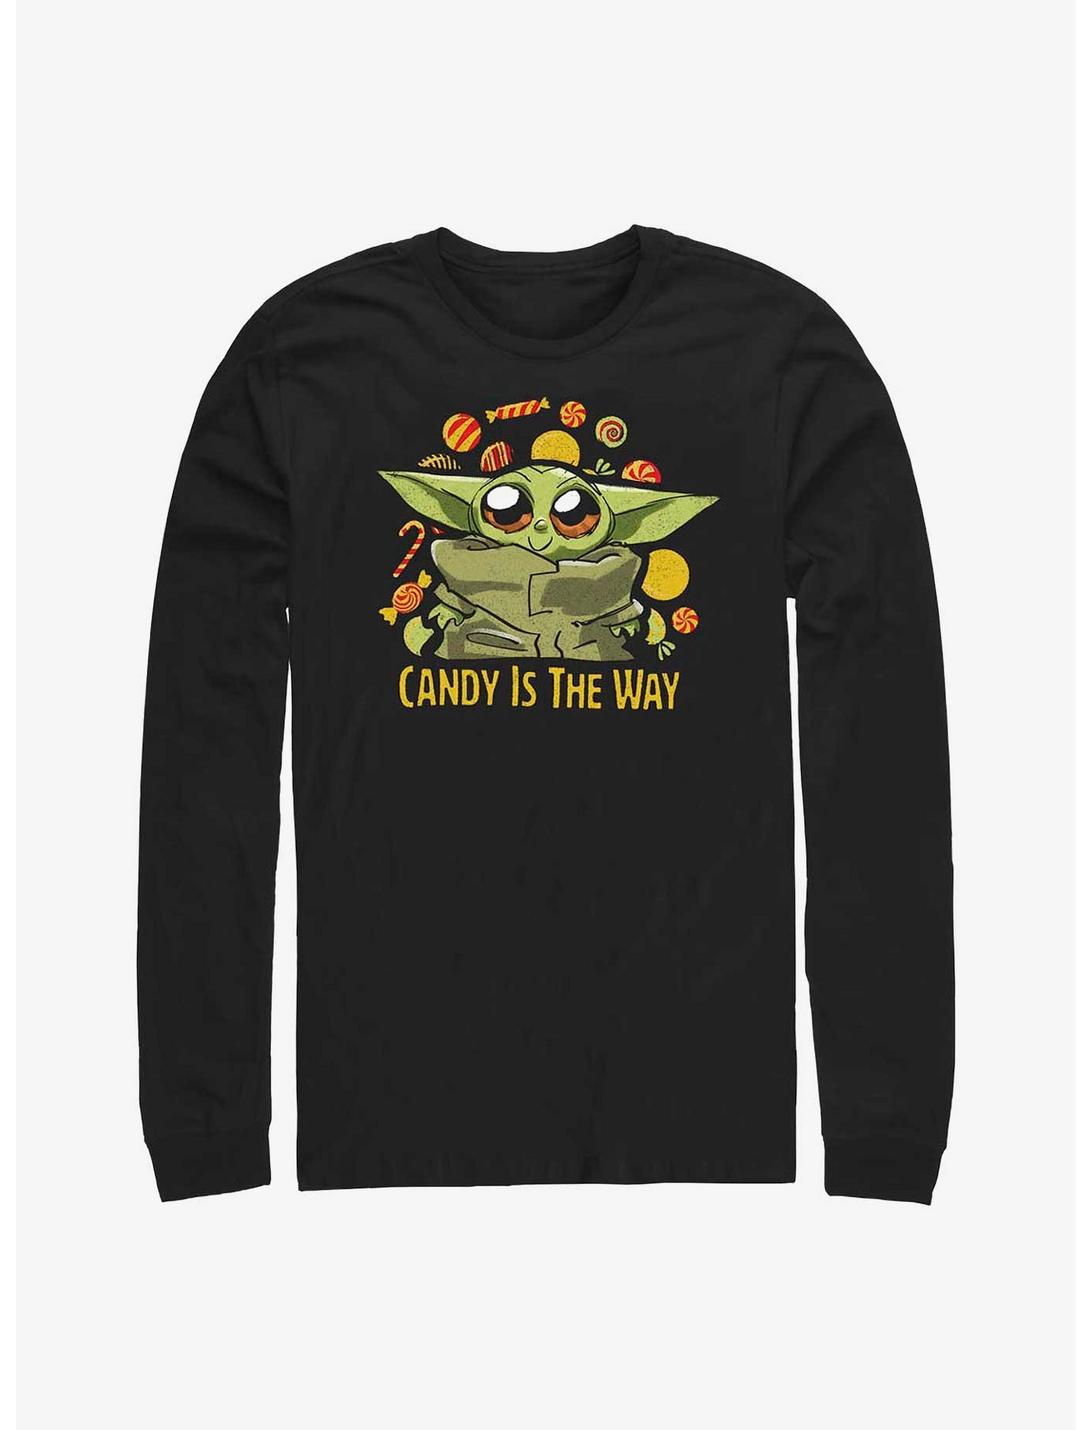 Star Wars The Mandalorian The Child Candy Is The Way Long-Sleeve T-Shirt, BLACK, hi-res